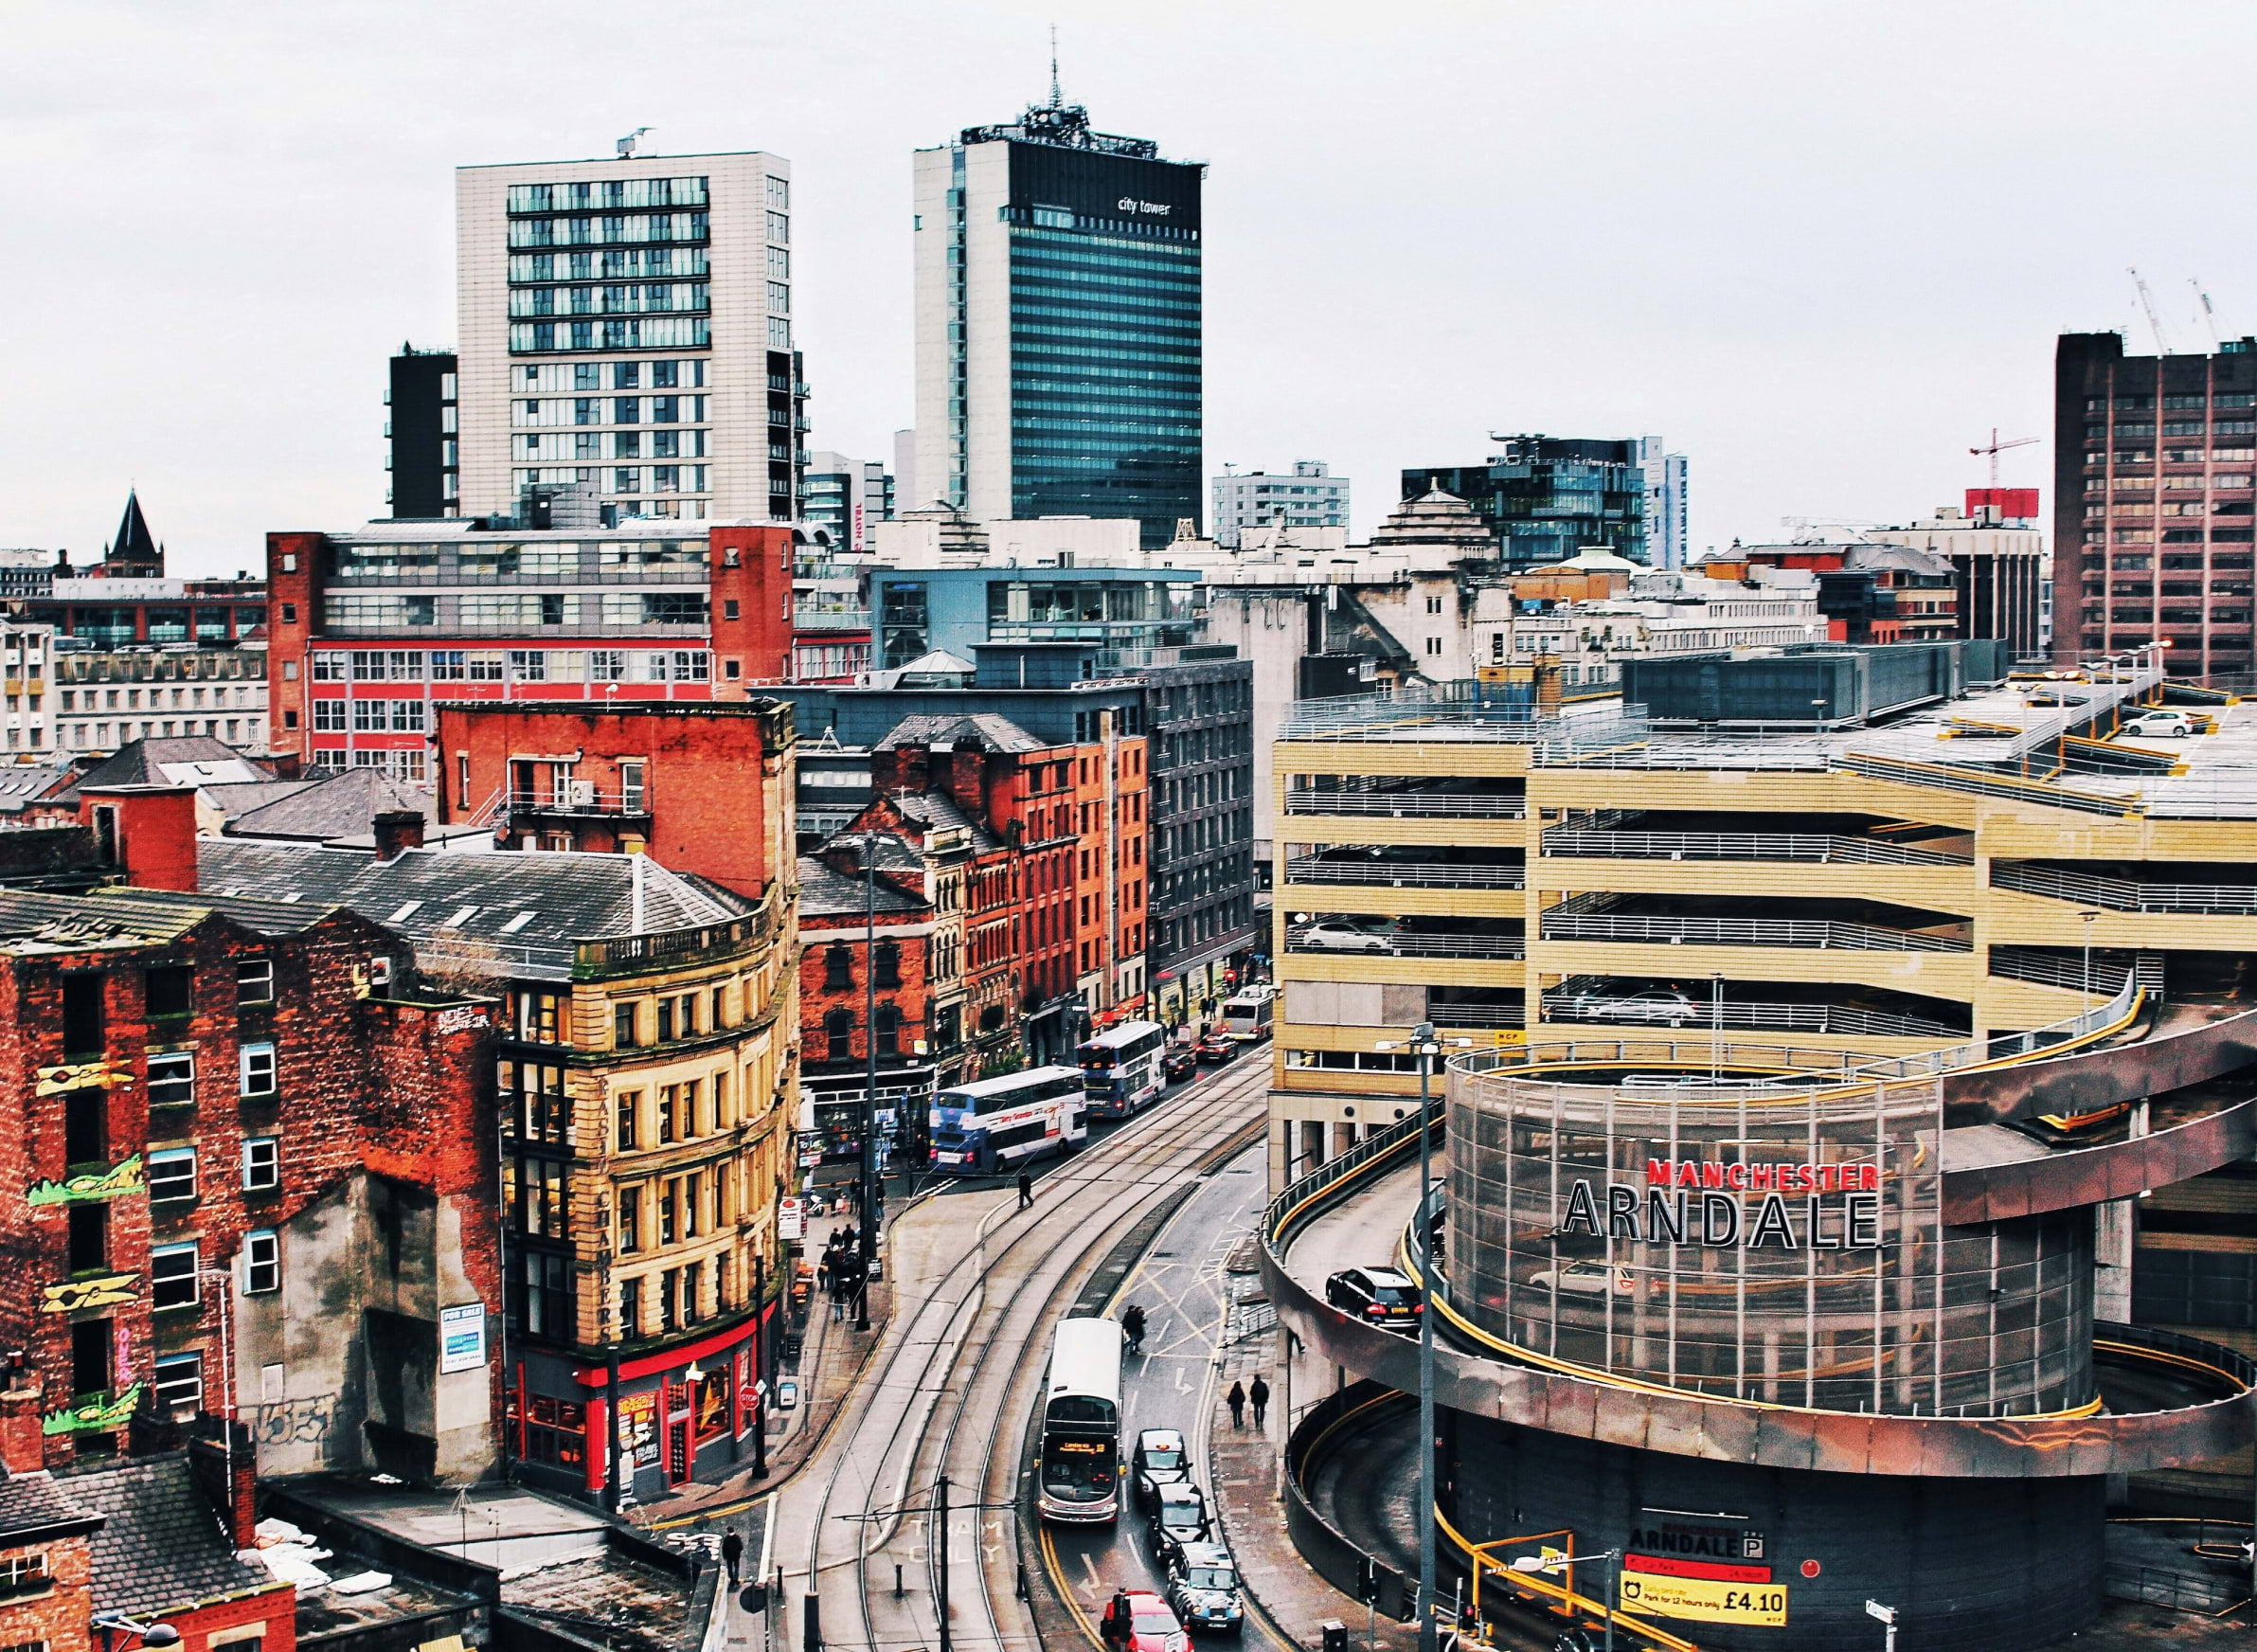 A city view of Manchester with Manchester Arndale in the foreground